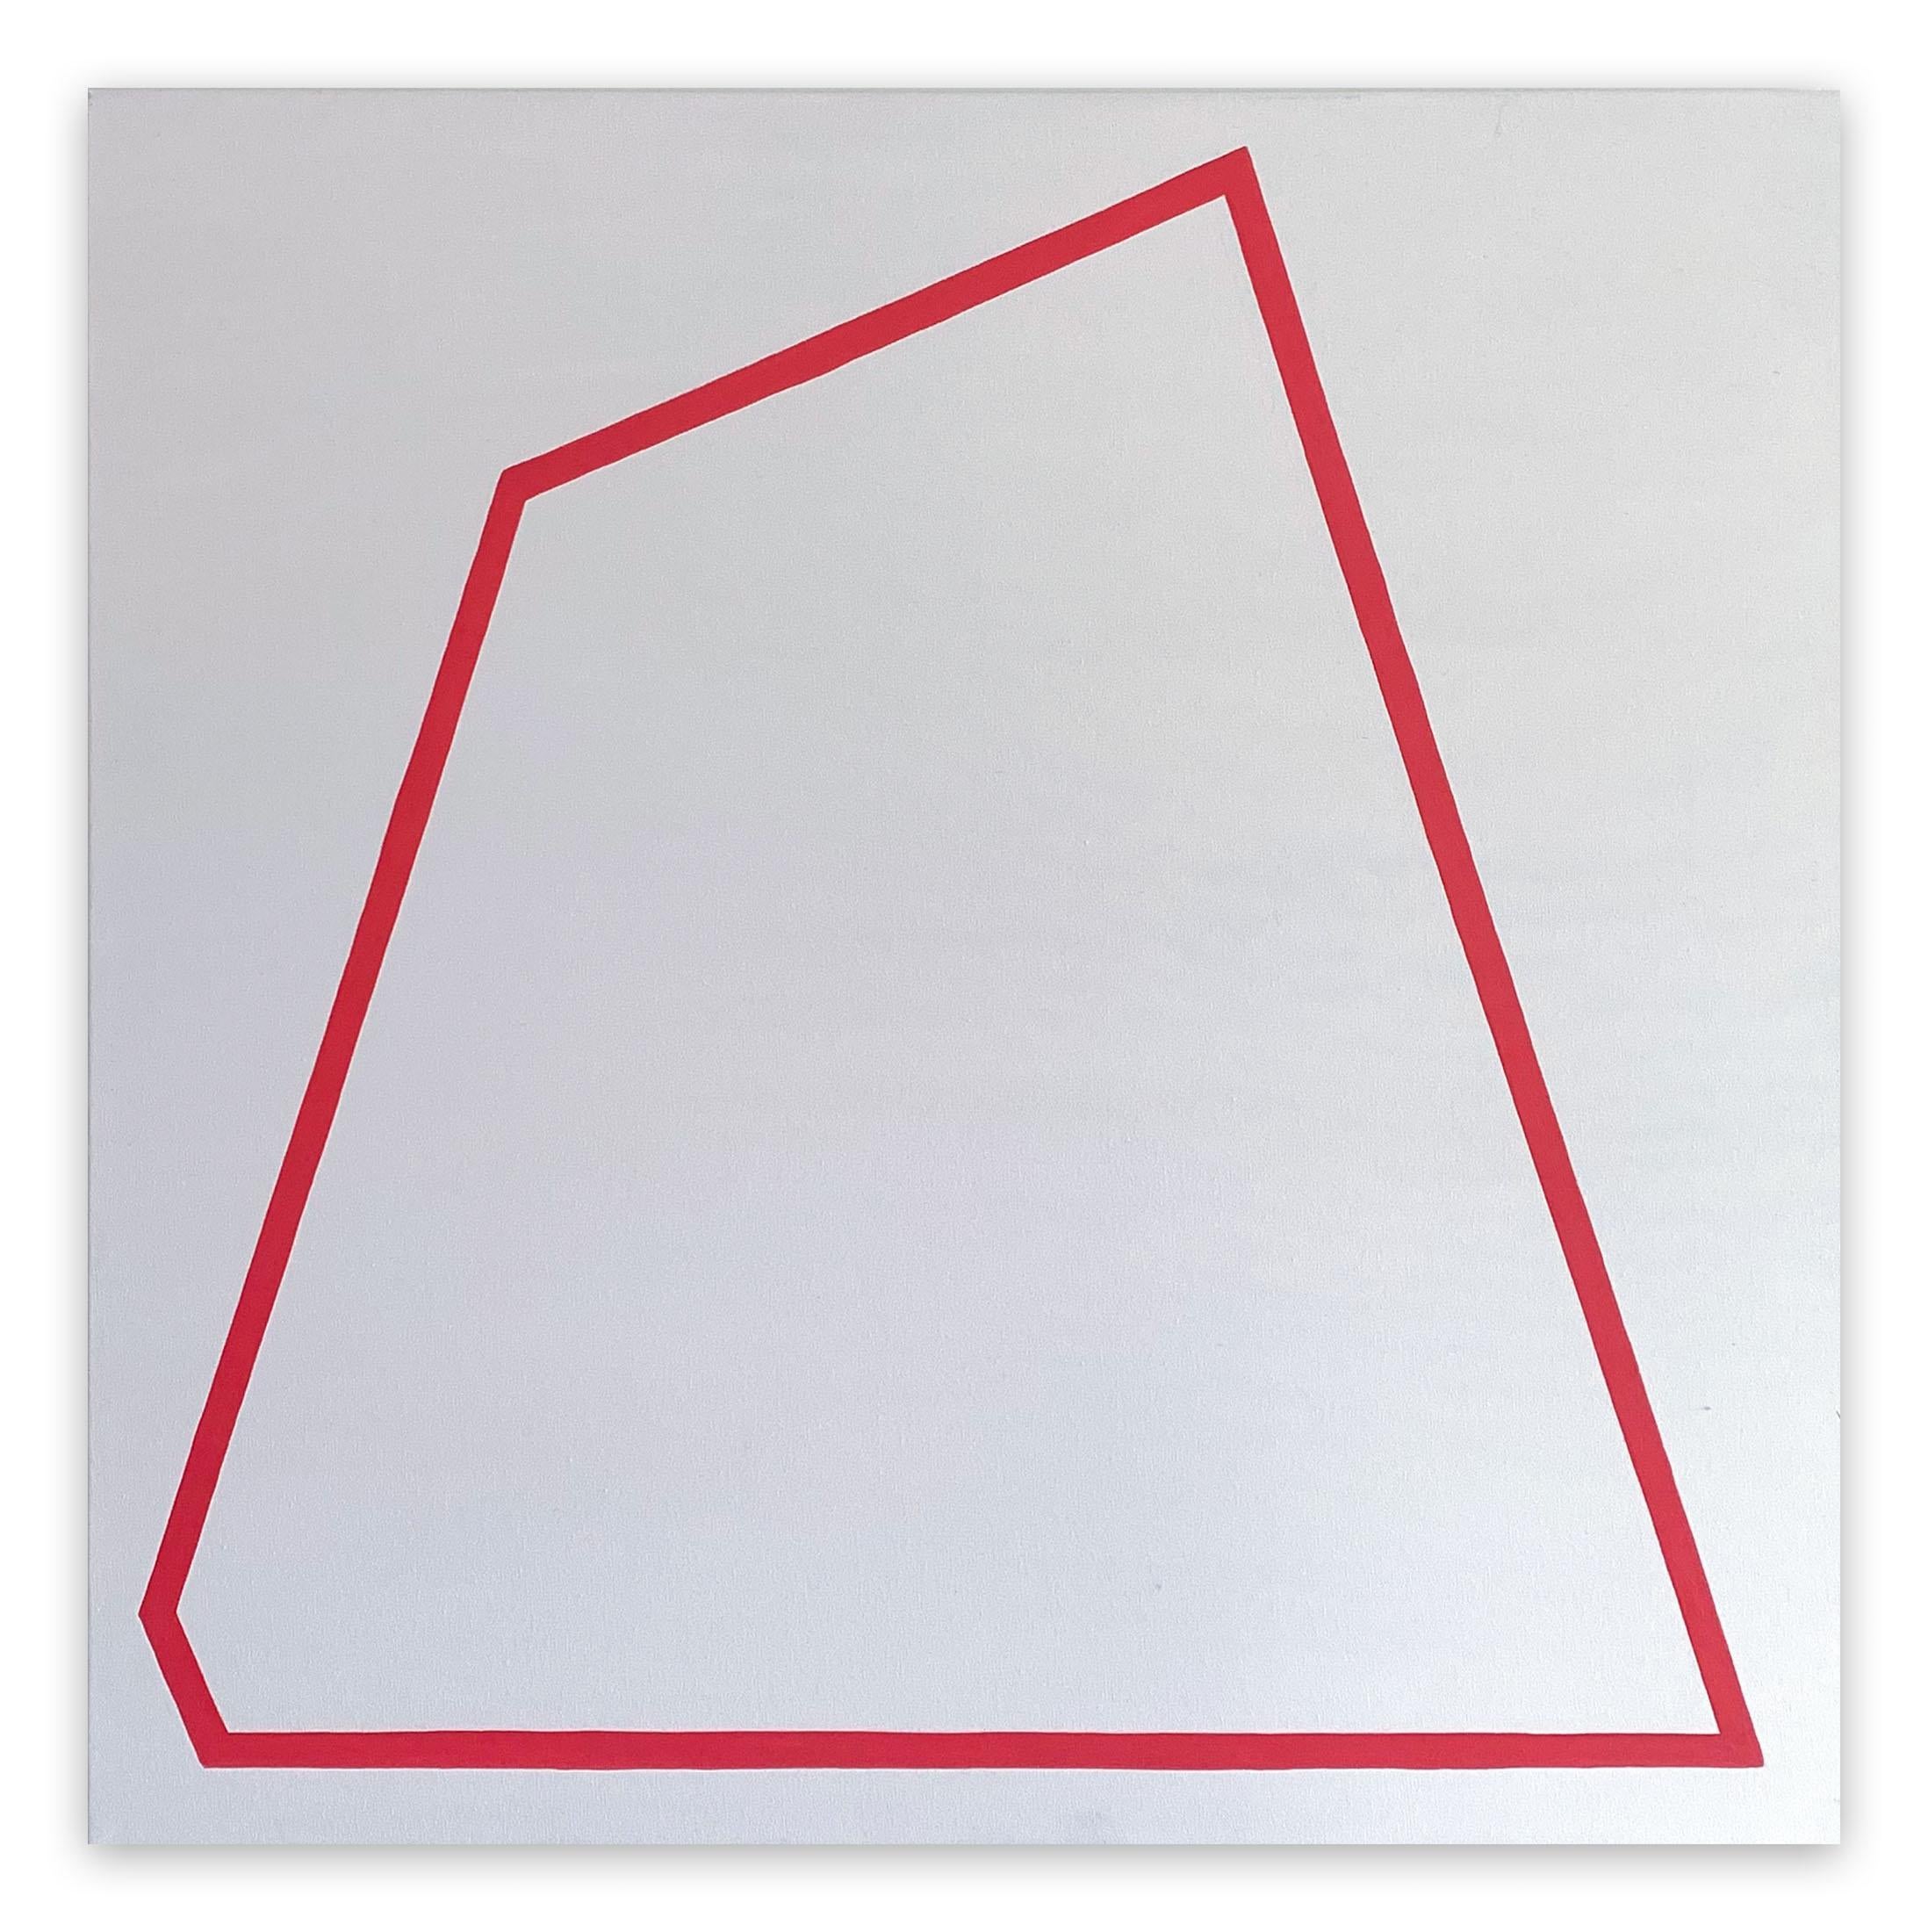 Untitled Red 2009 (Abstract Painting)

Acrylic on canvas - Unframed.

Pedersen works with acrylic paint.

When painting a composition, she tends toward a limited color palette, often reducing the composition to minimal, hard-edged shapes on